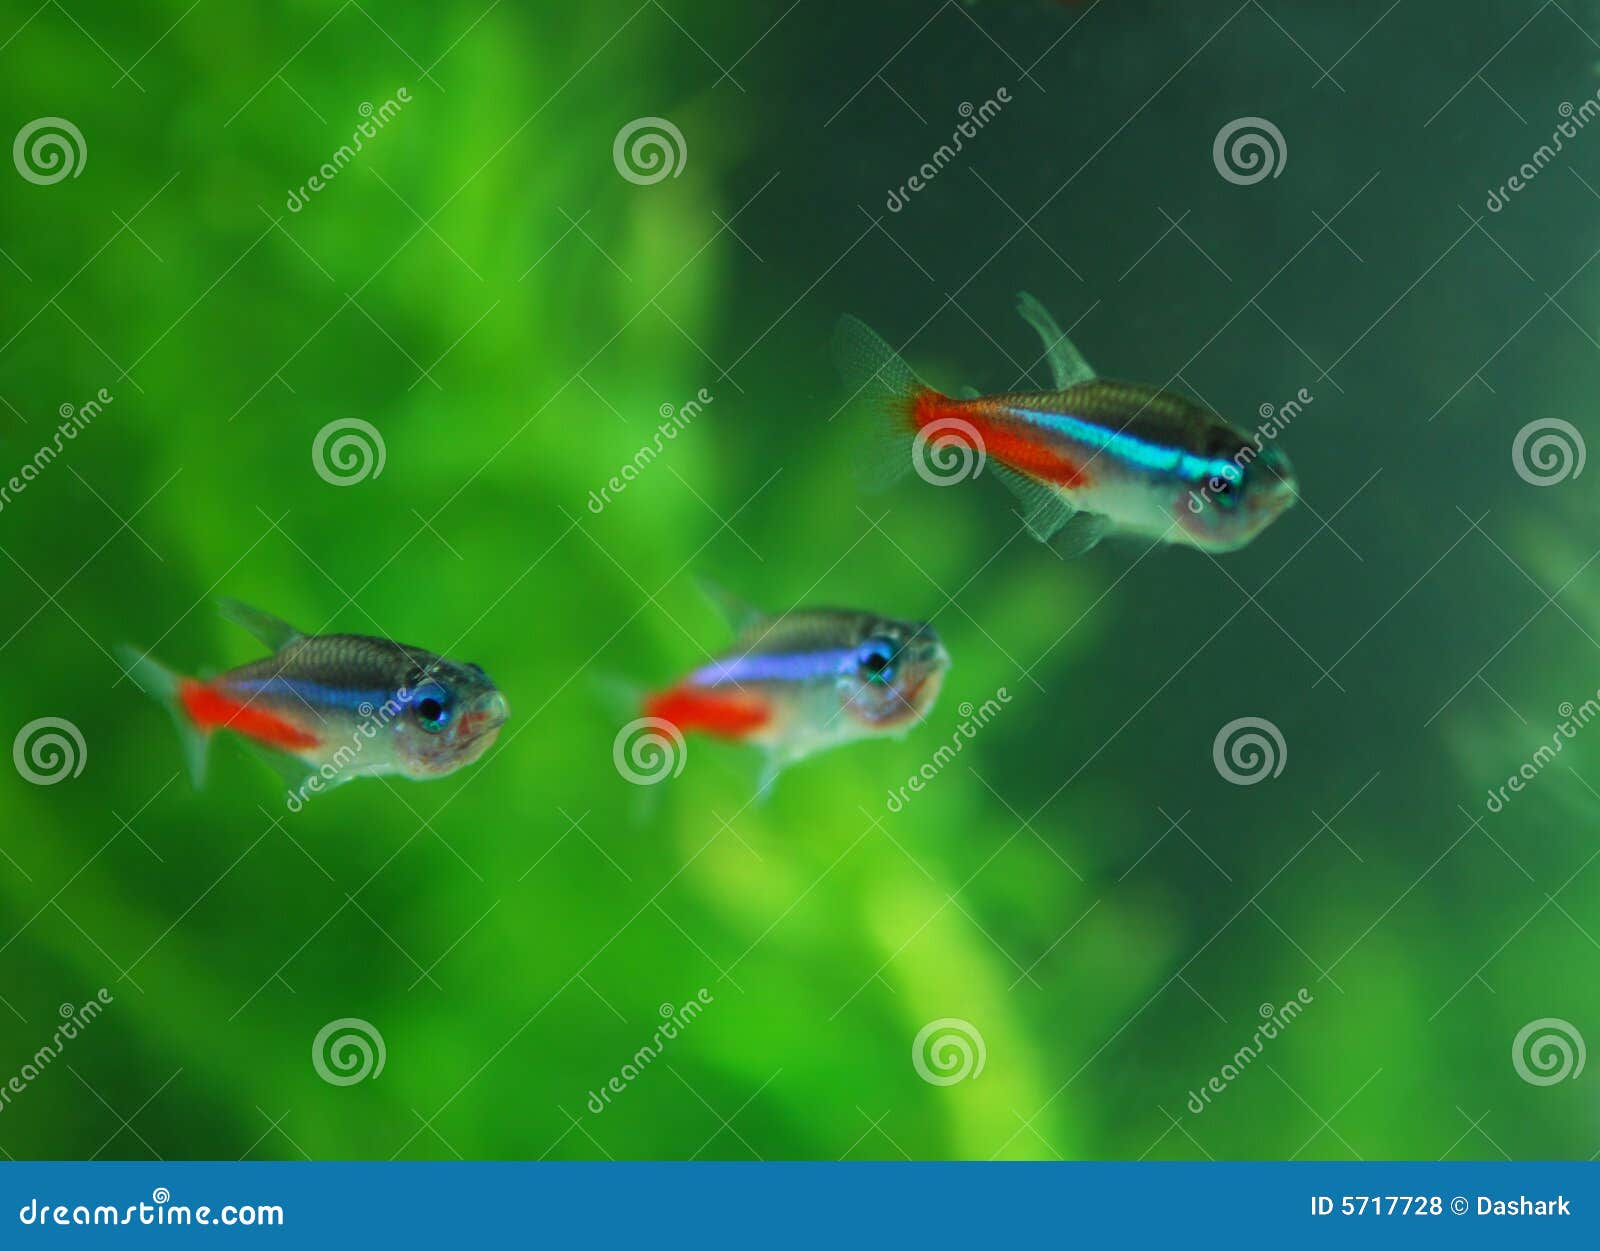 Red neon fish stock photo. Image of neon, scale, home - 5717728